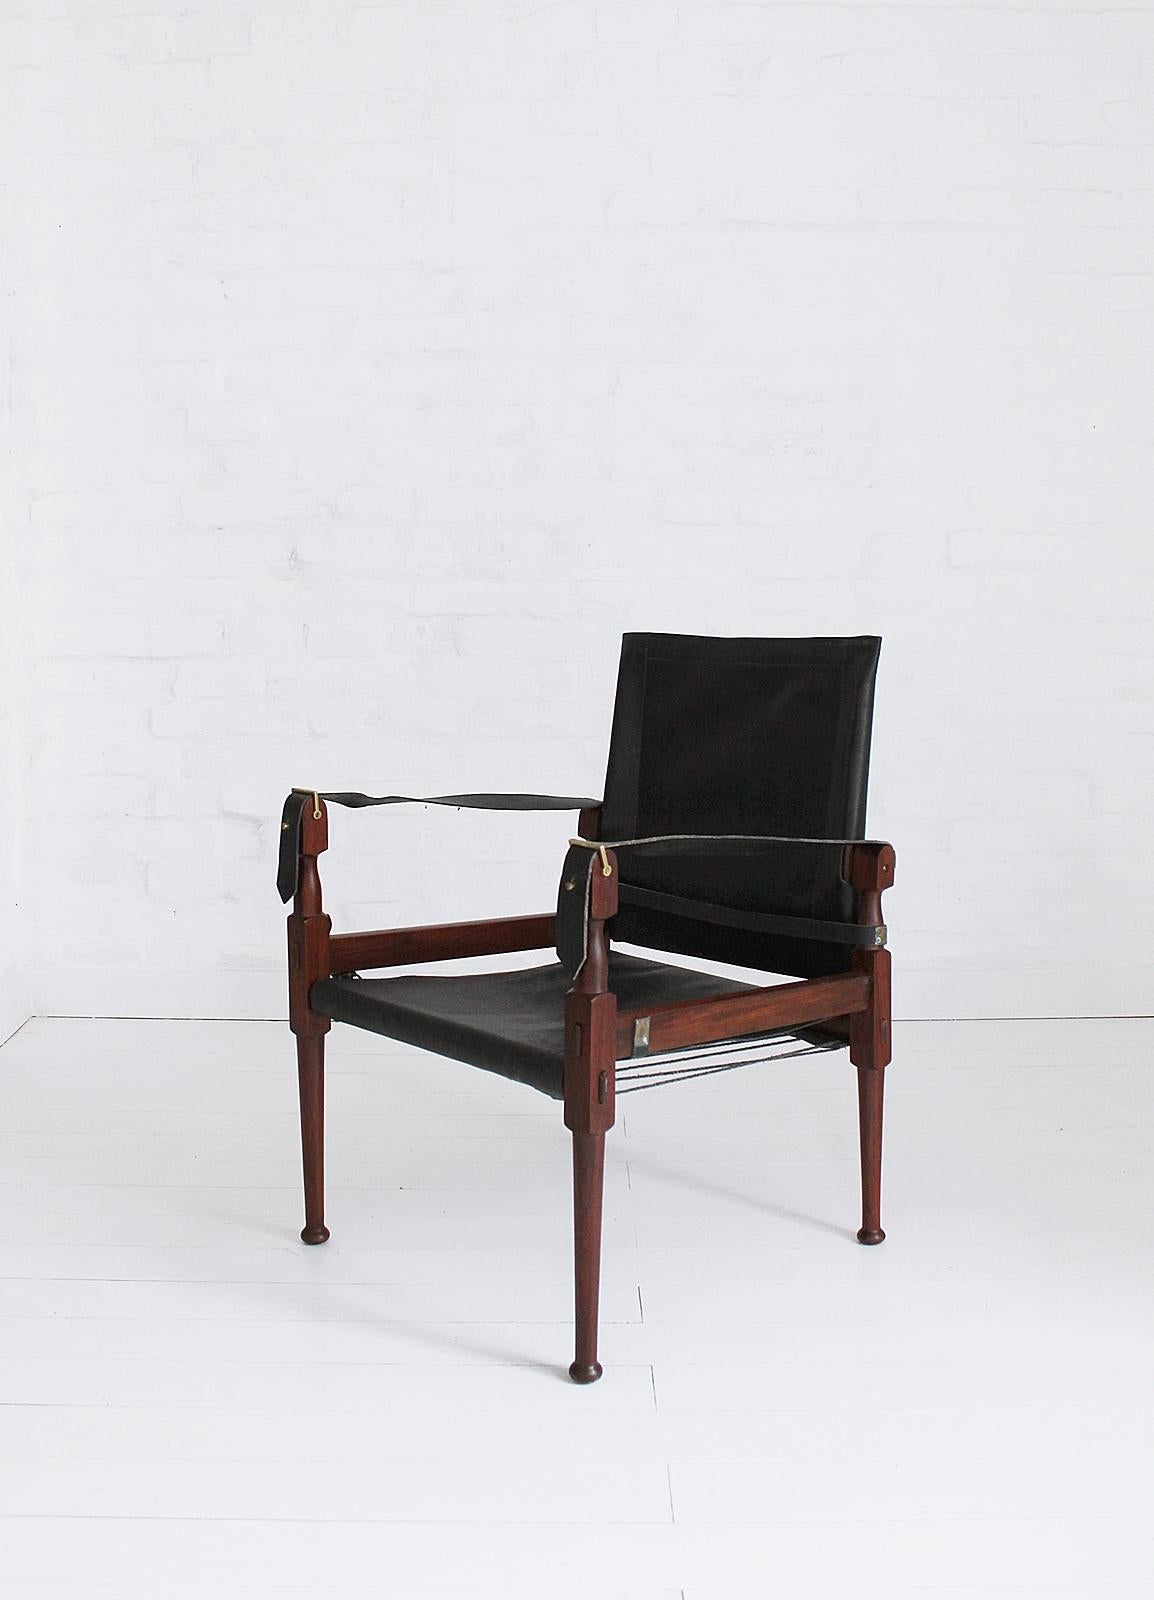 Safari chair designed and manufactured by M. Hayat & Brothers, Pakistan 1970.

M. Hayat & Brothers produced a lightweight, portable armchair based on the model of the English officers' chairs.

This chair is easy to disassemble without using any